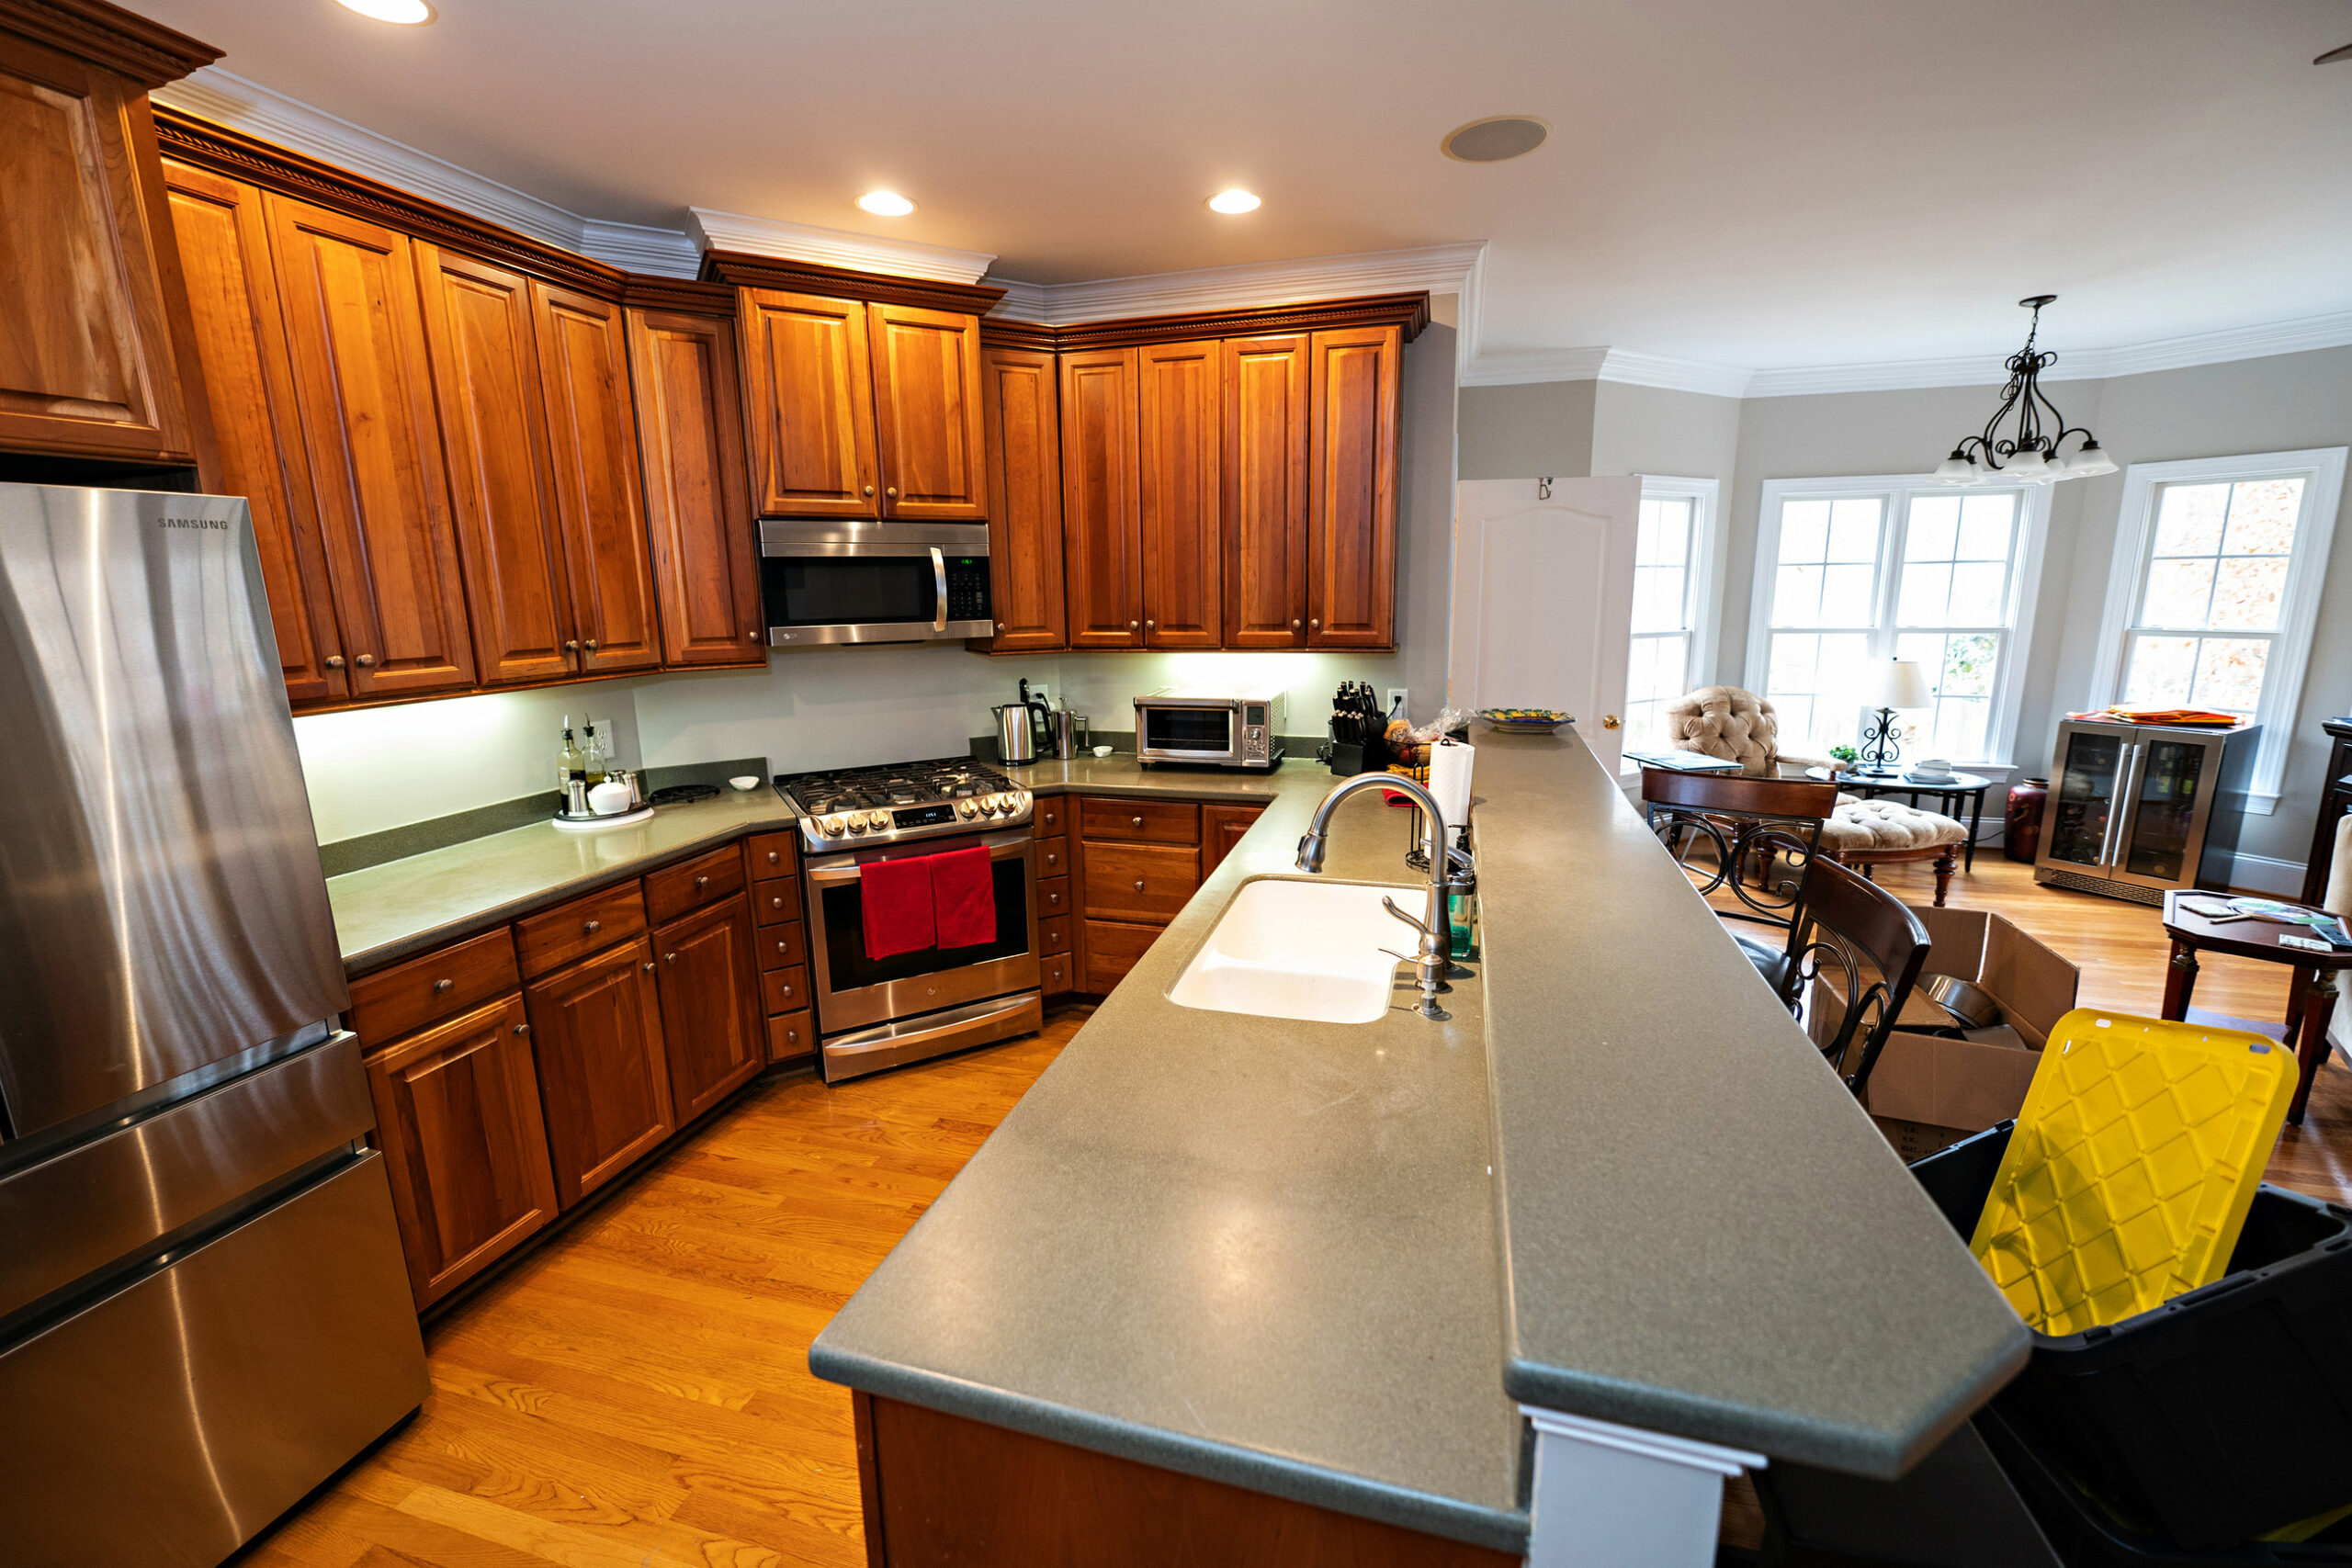 Kitchen Remodel by Kitchen Express in Greensboro, NC